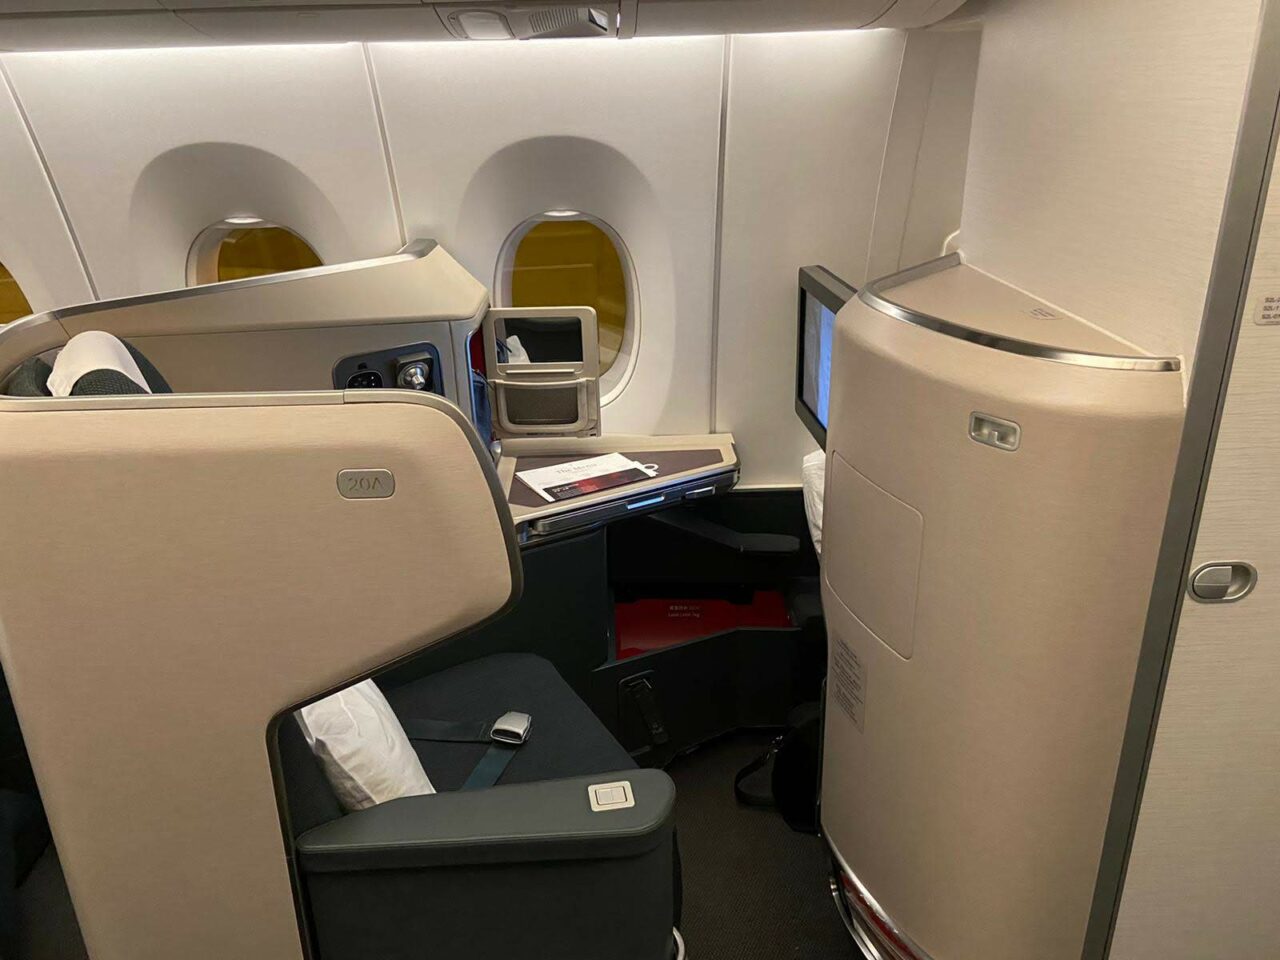 Cathay Pacific Business Class Seat 